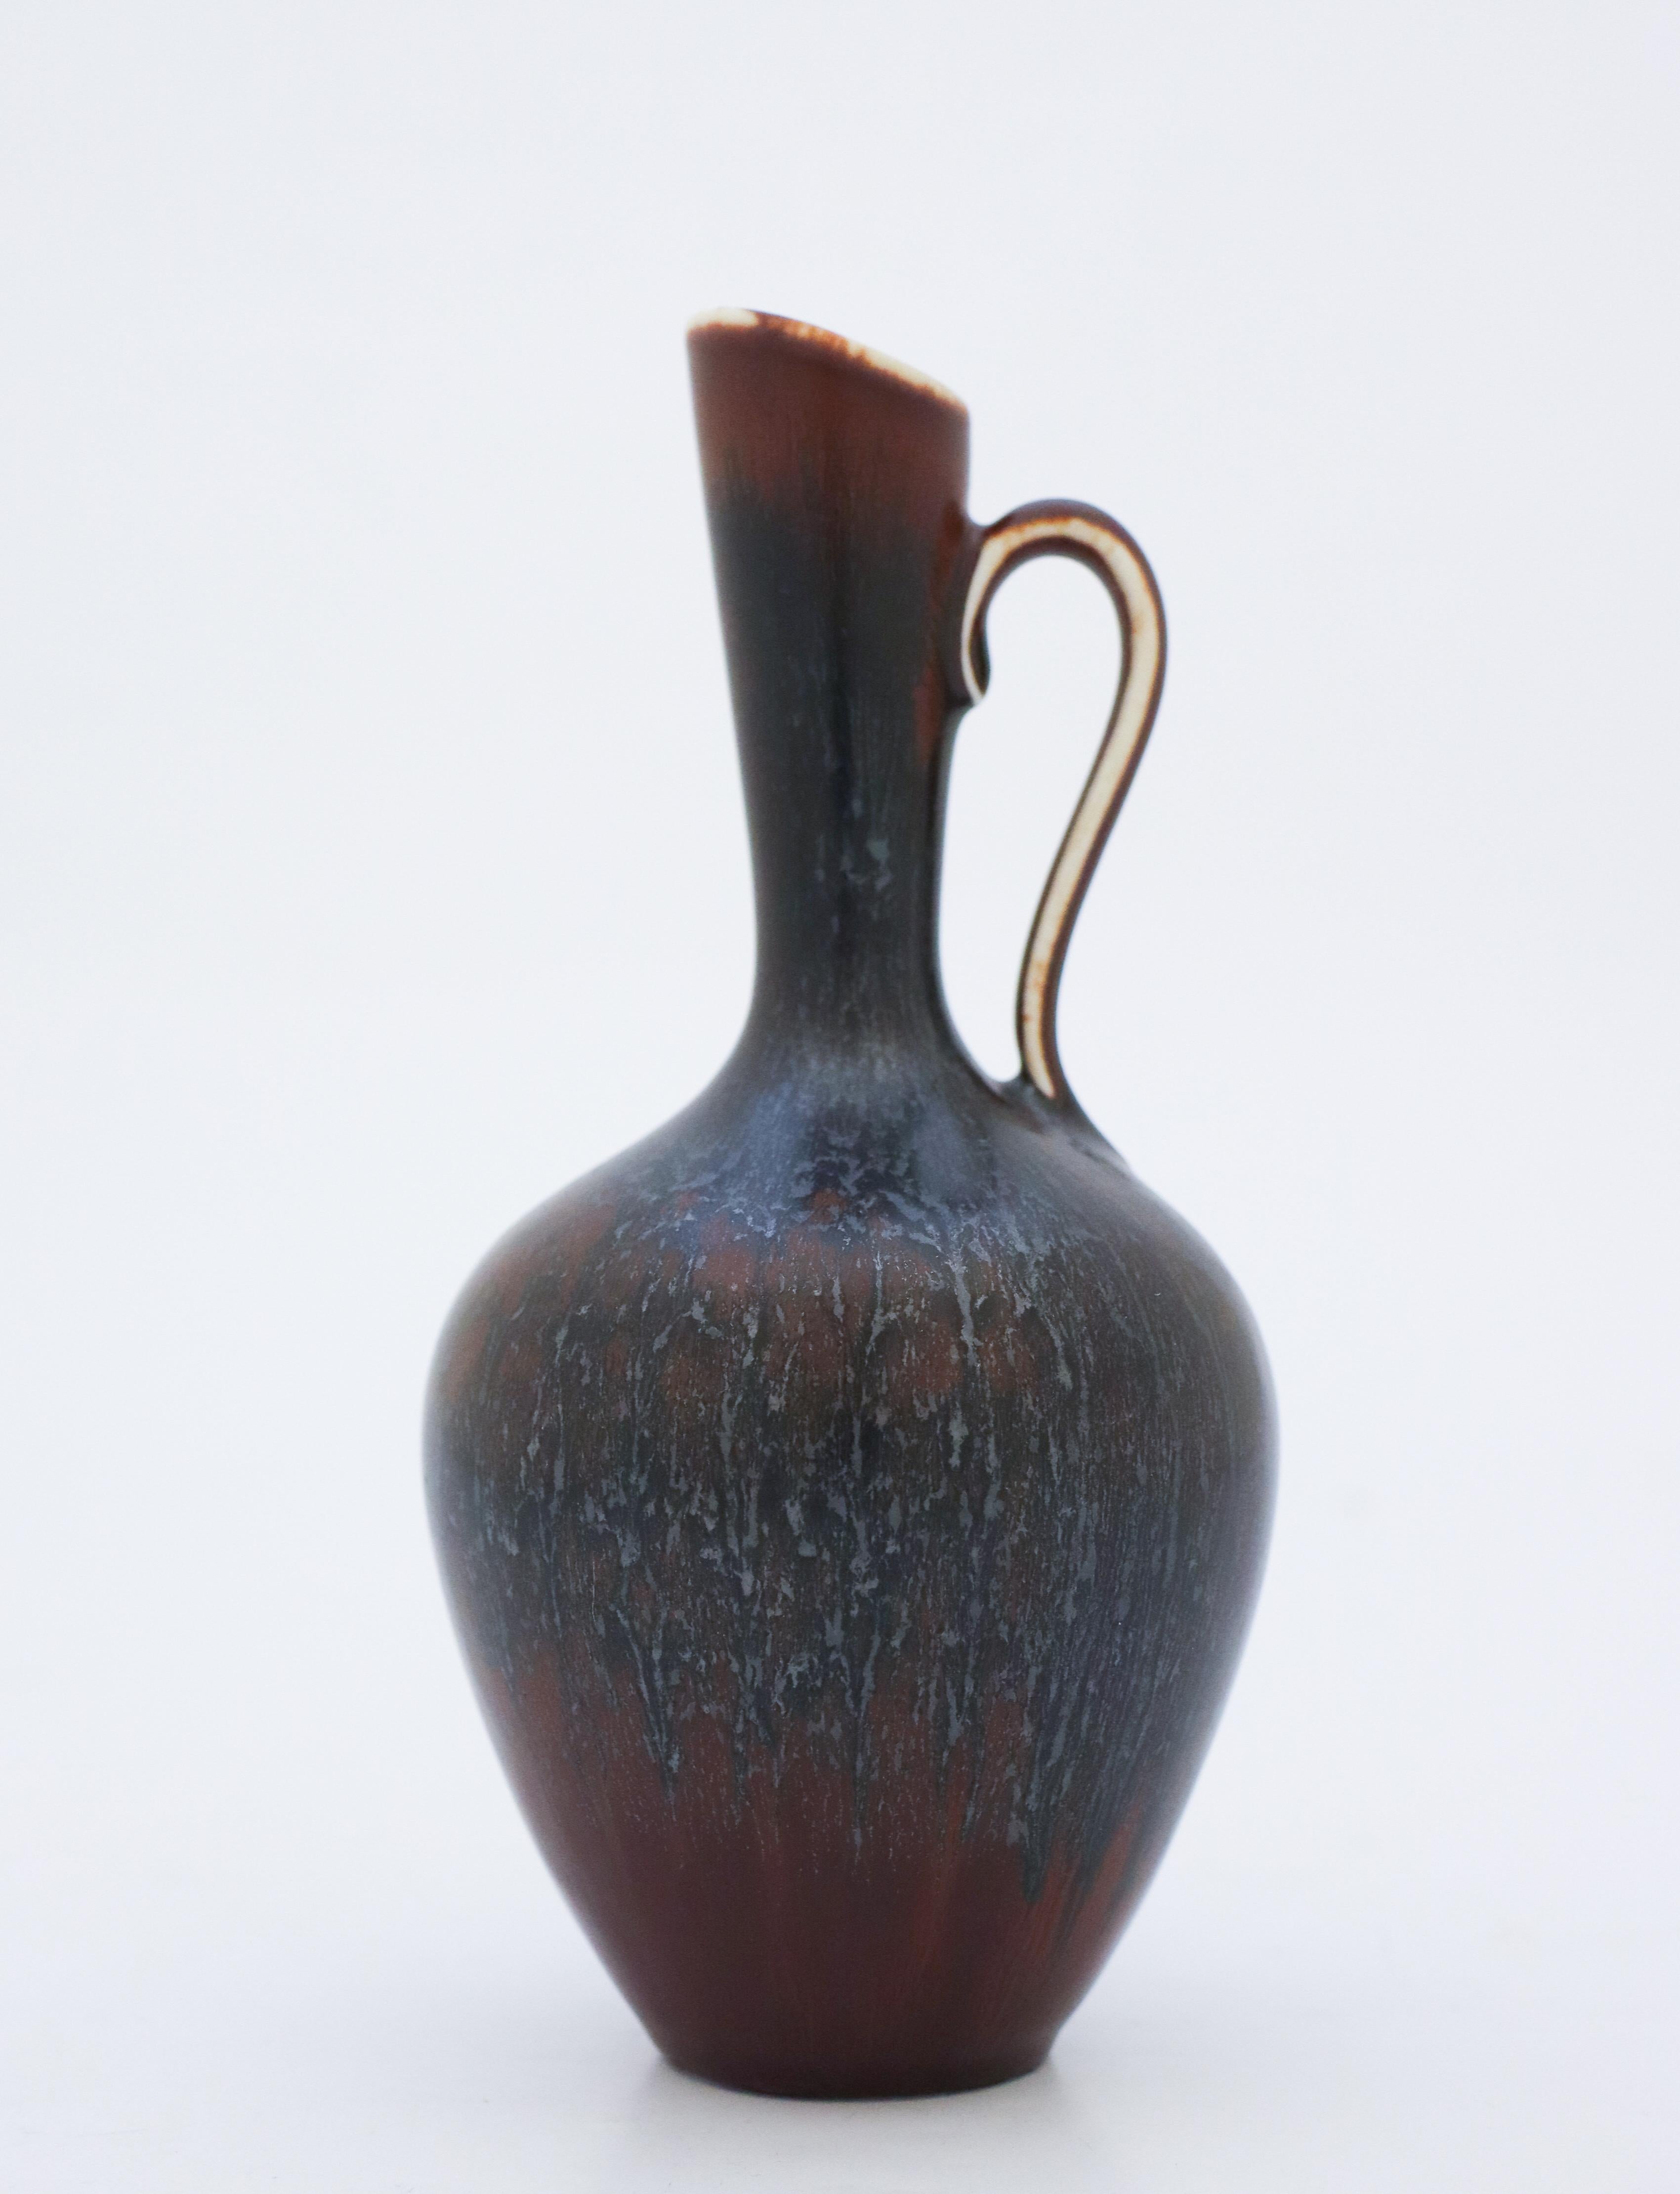 A dark vase (black & brown) with a lovely glaze designed by Gunnar Nylund at Rörstrand, it´s 17,5 cm (7